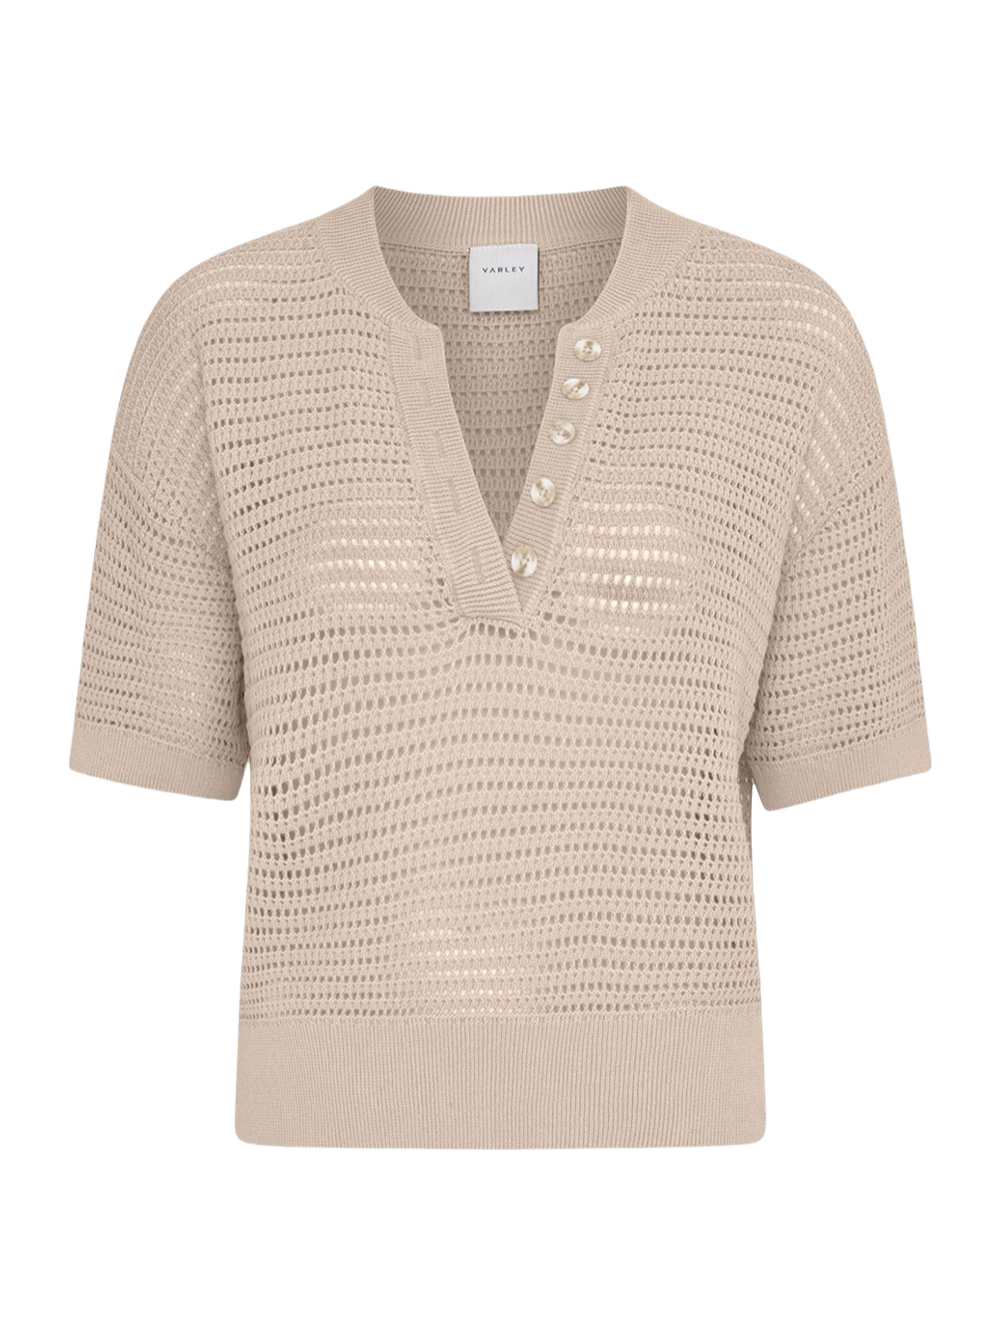 Varley Callie Knit Top (More Colors)